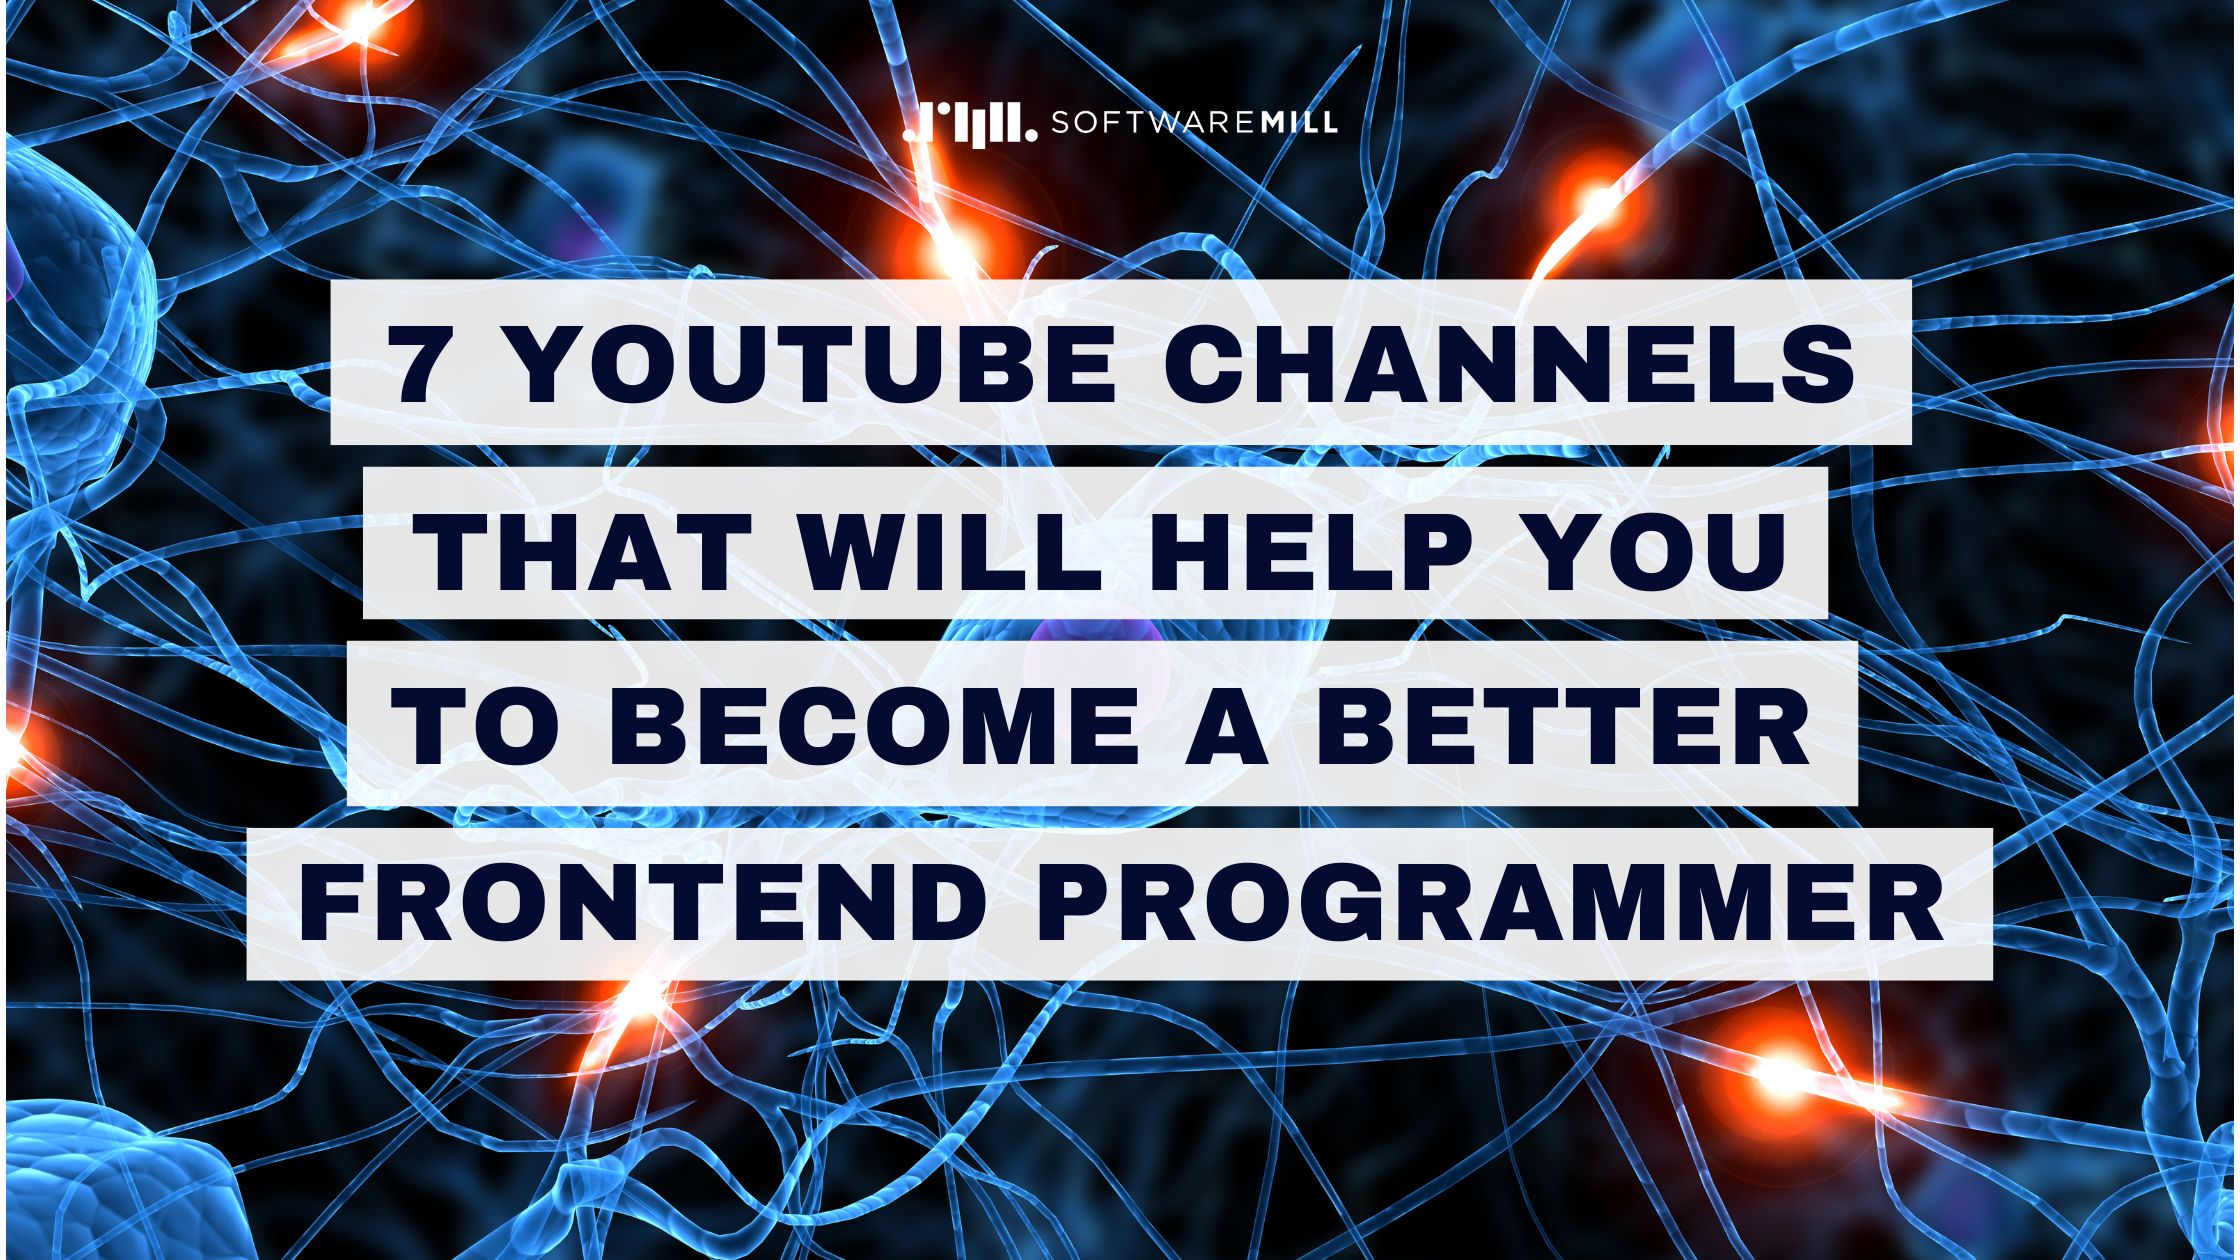 7 YouTube Channels That Will Help You To Become A Better Frontend Programmer webp image